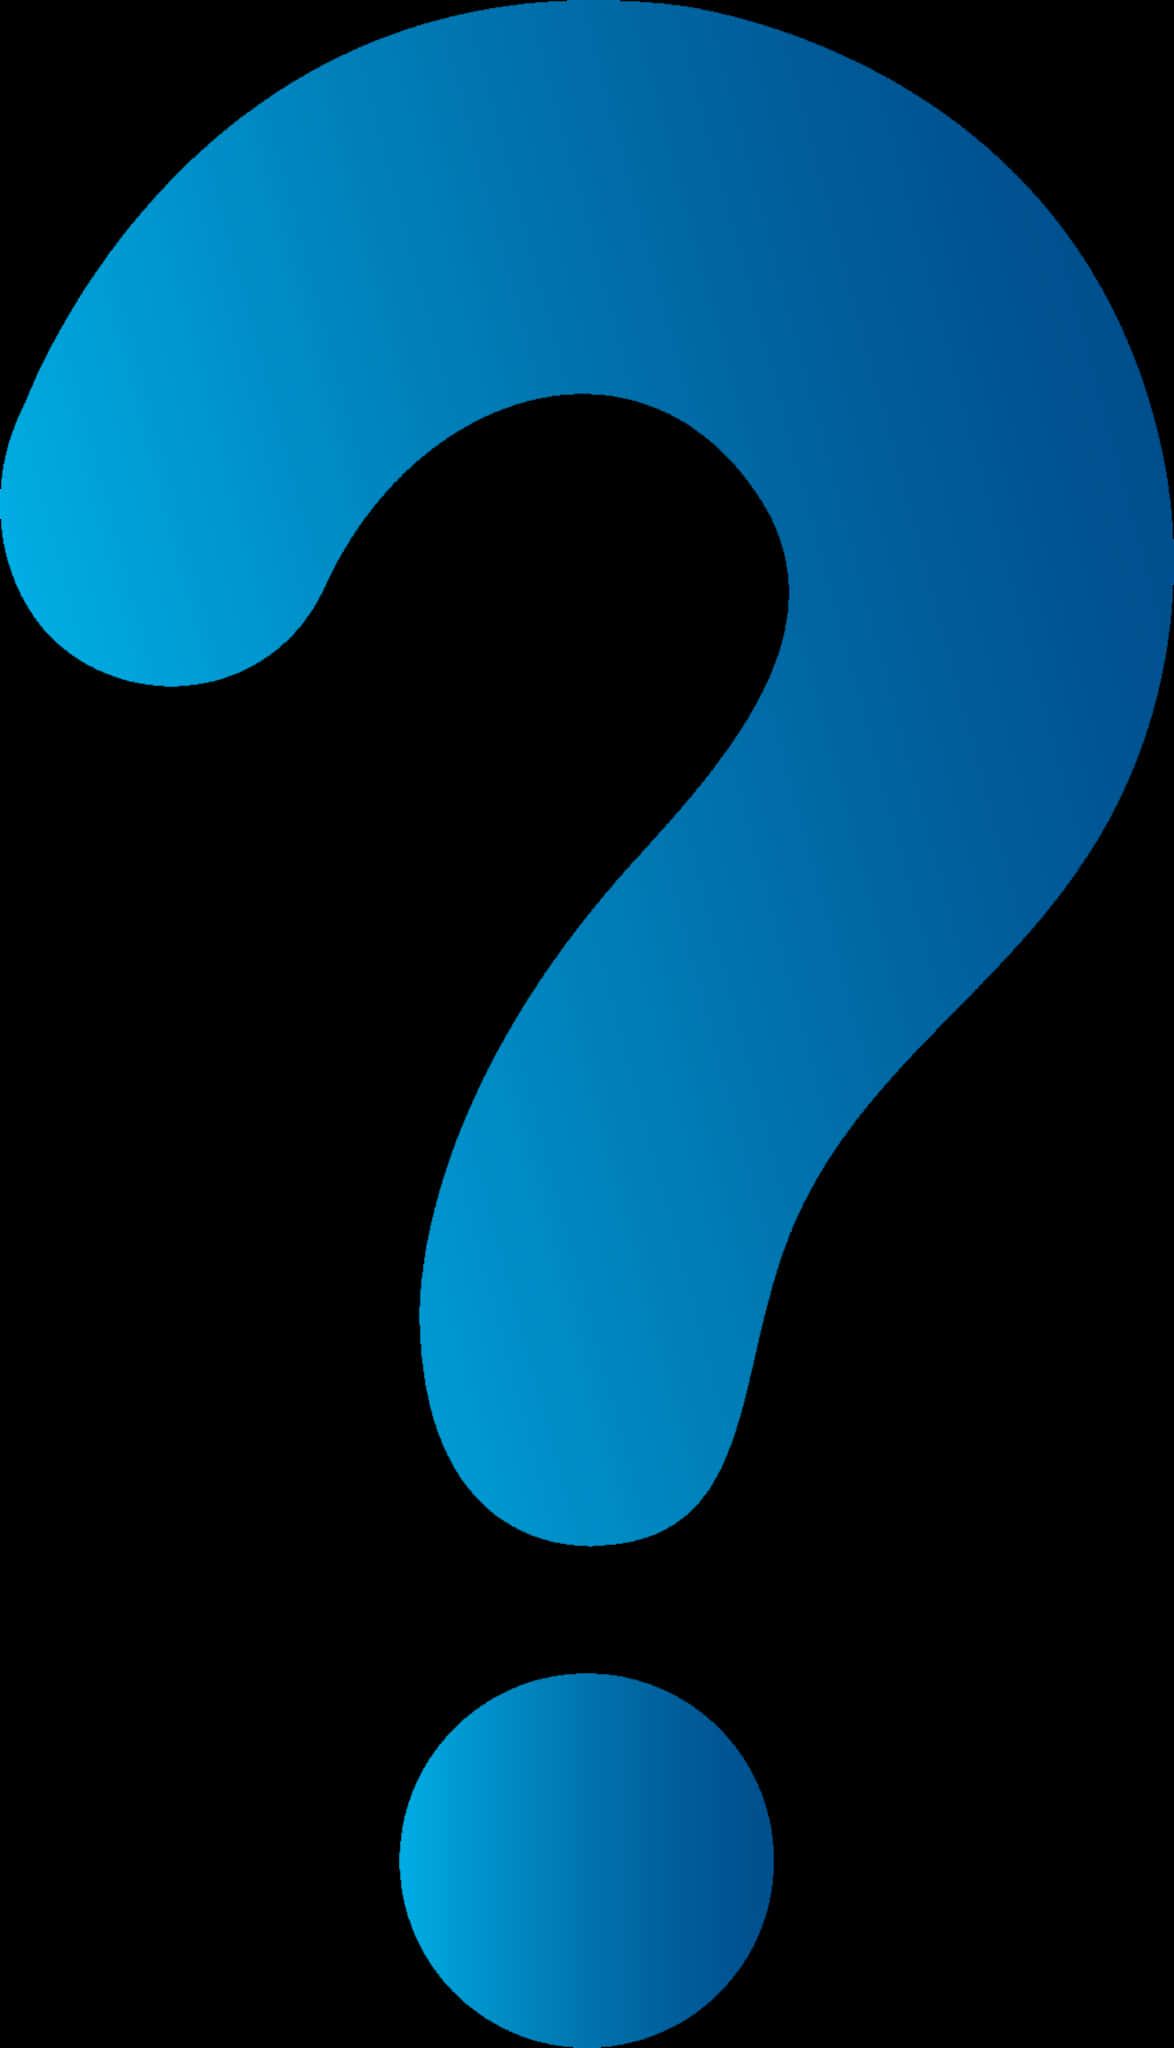 A Blue Question Mark On A Black Background